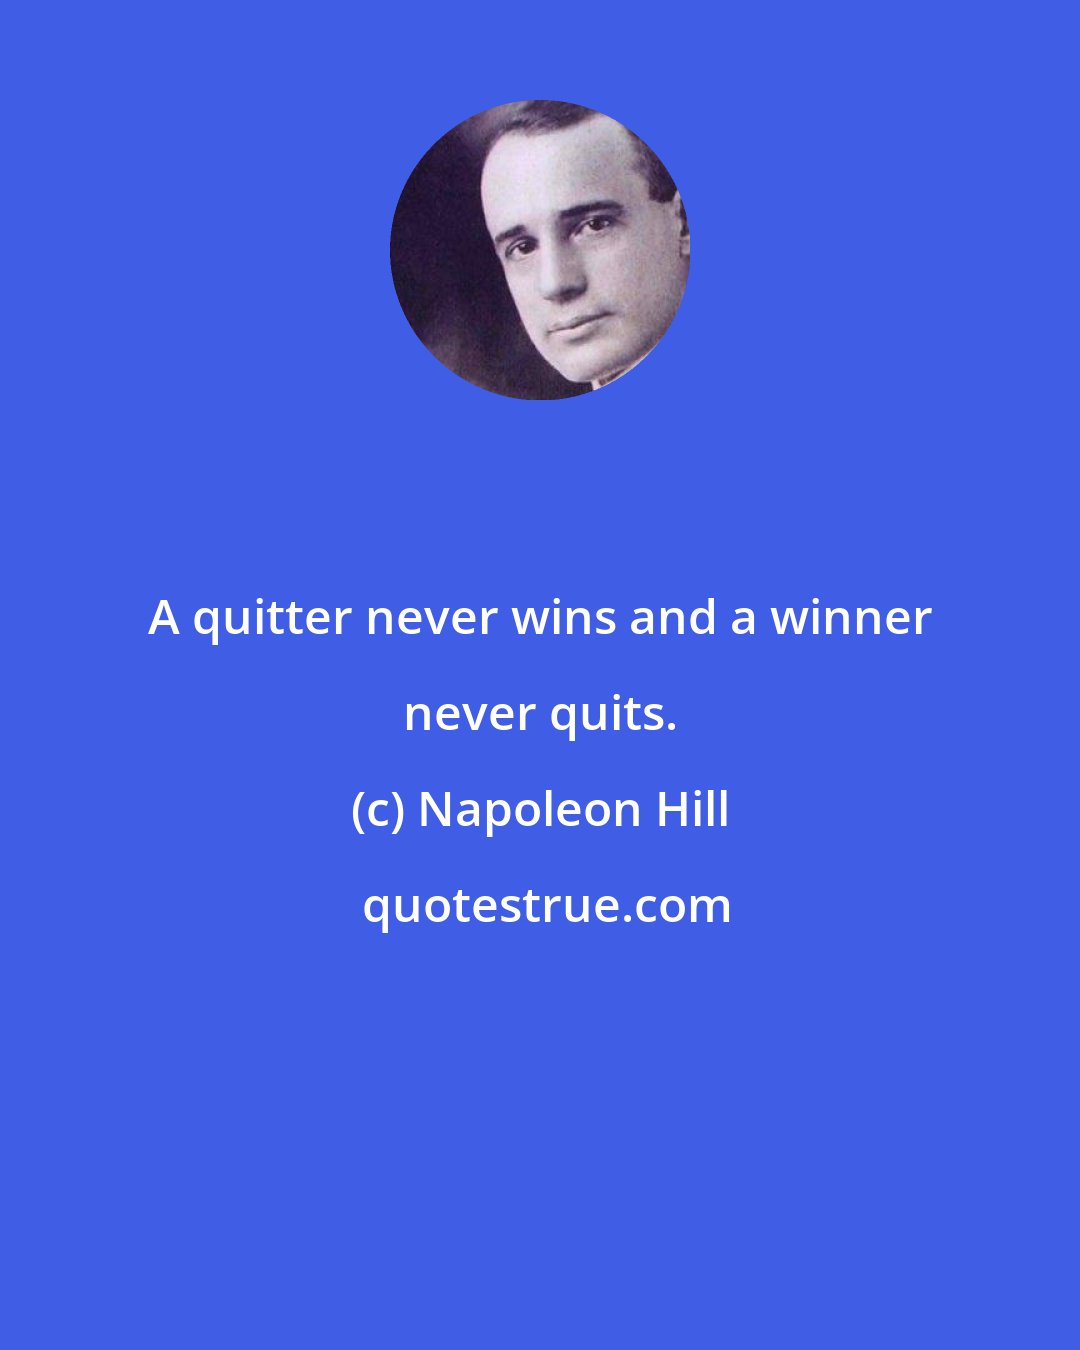 Napoleon Hill: A quitter never wins and a winner never quits.